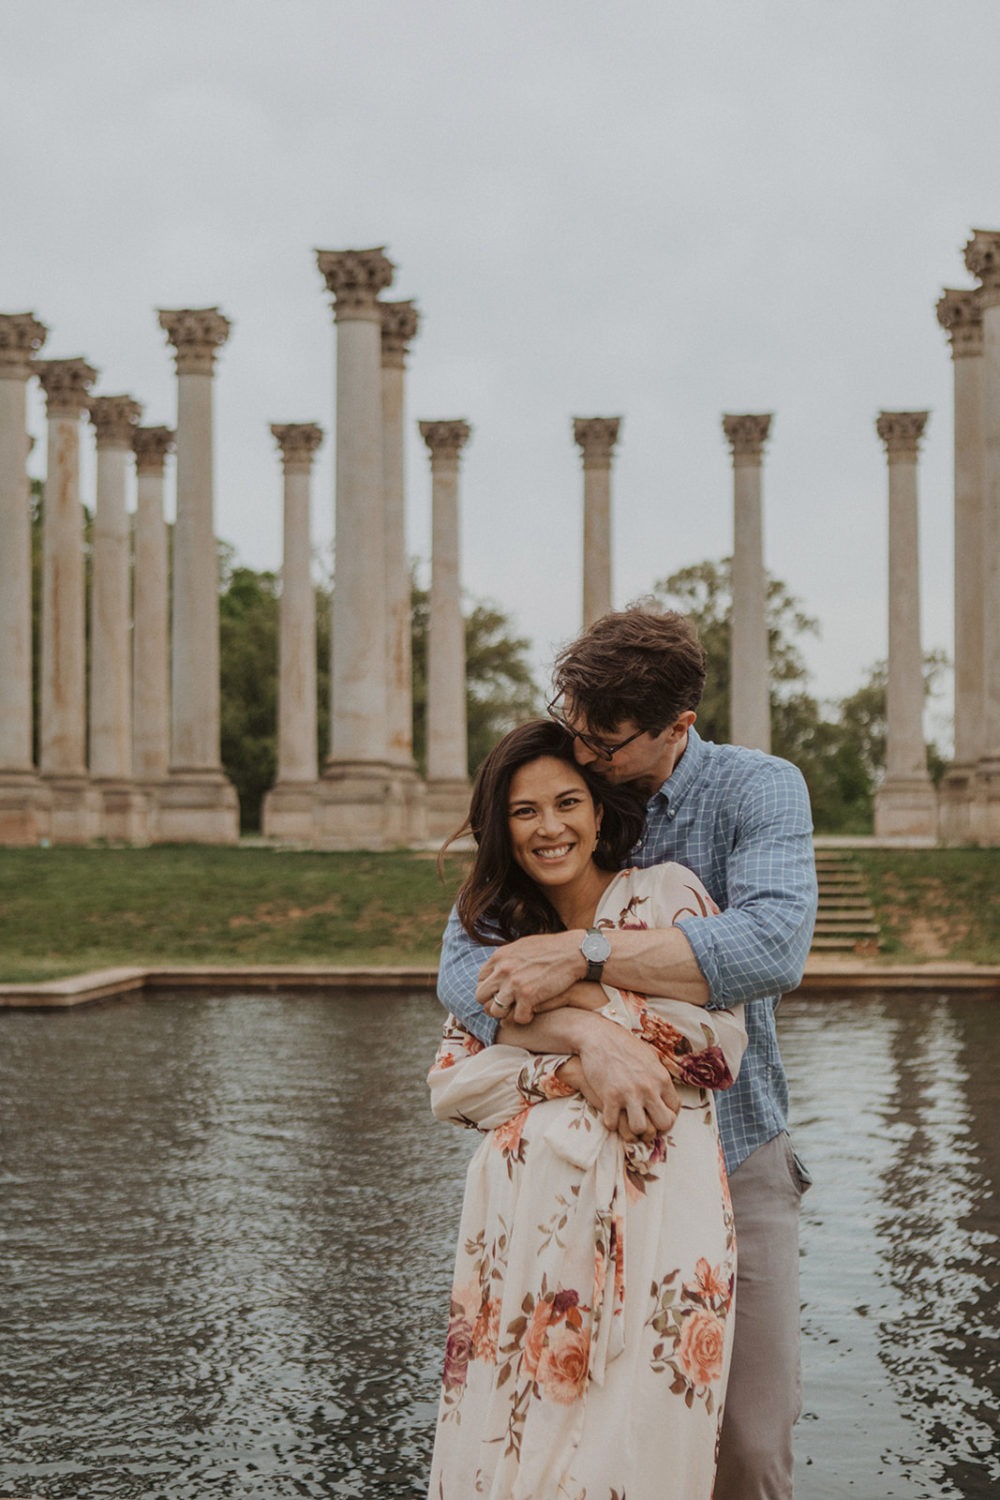 couple embraces in front of National Columns reflecting pool at National Arboretum DC